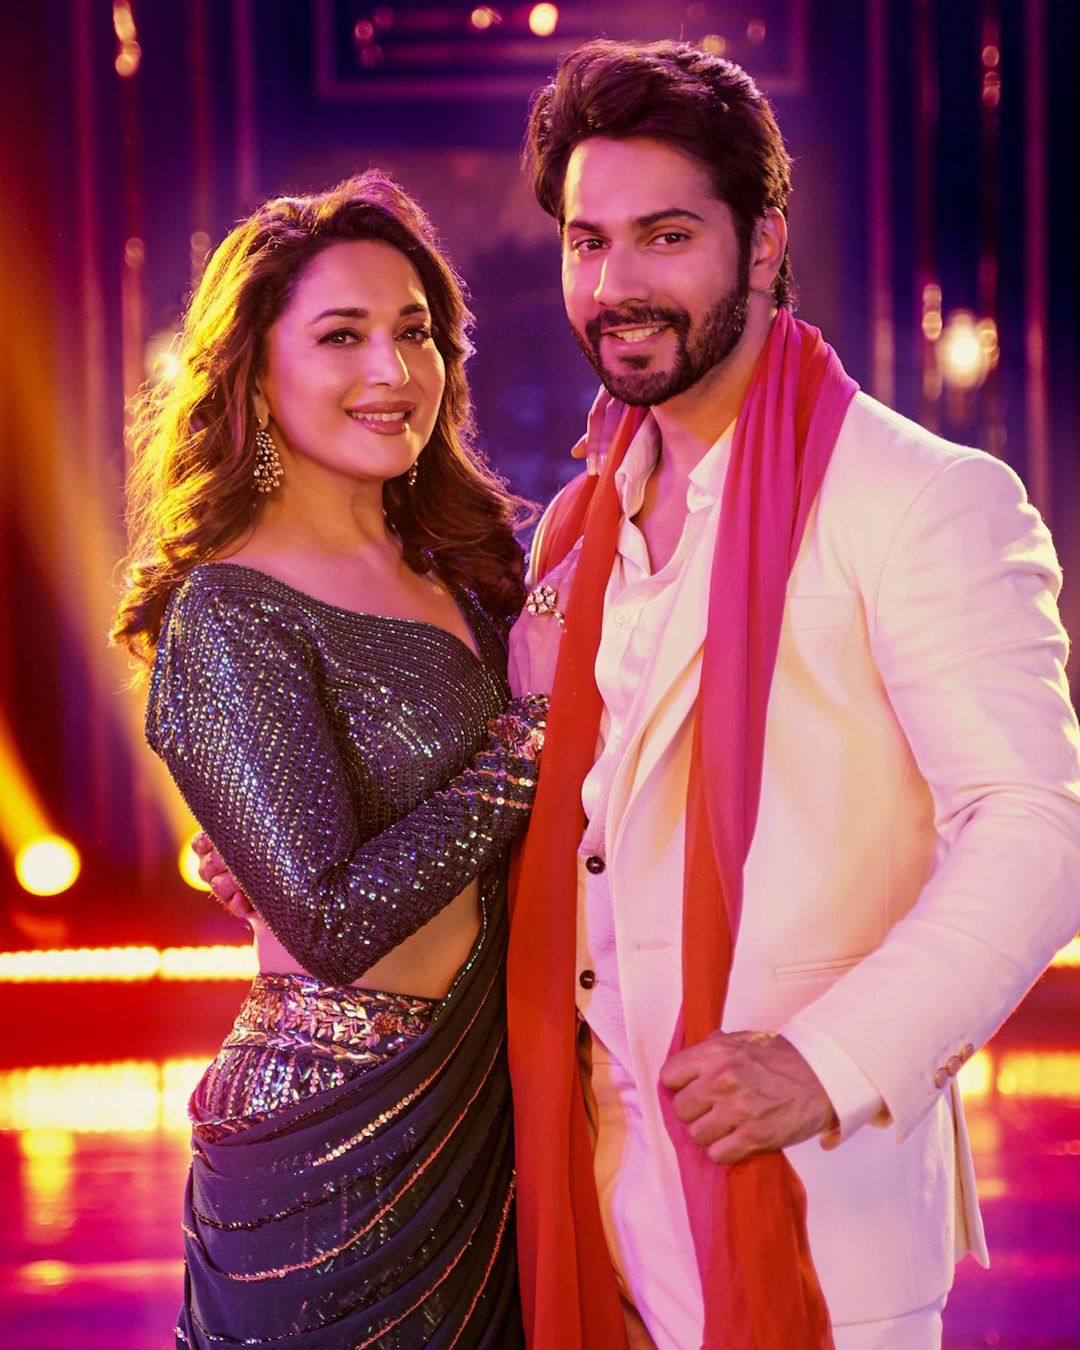 Varun Dhawan shared pictures with the dancing diva of Bollywood Madhuri Dixit